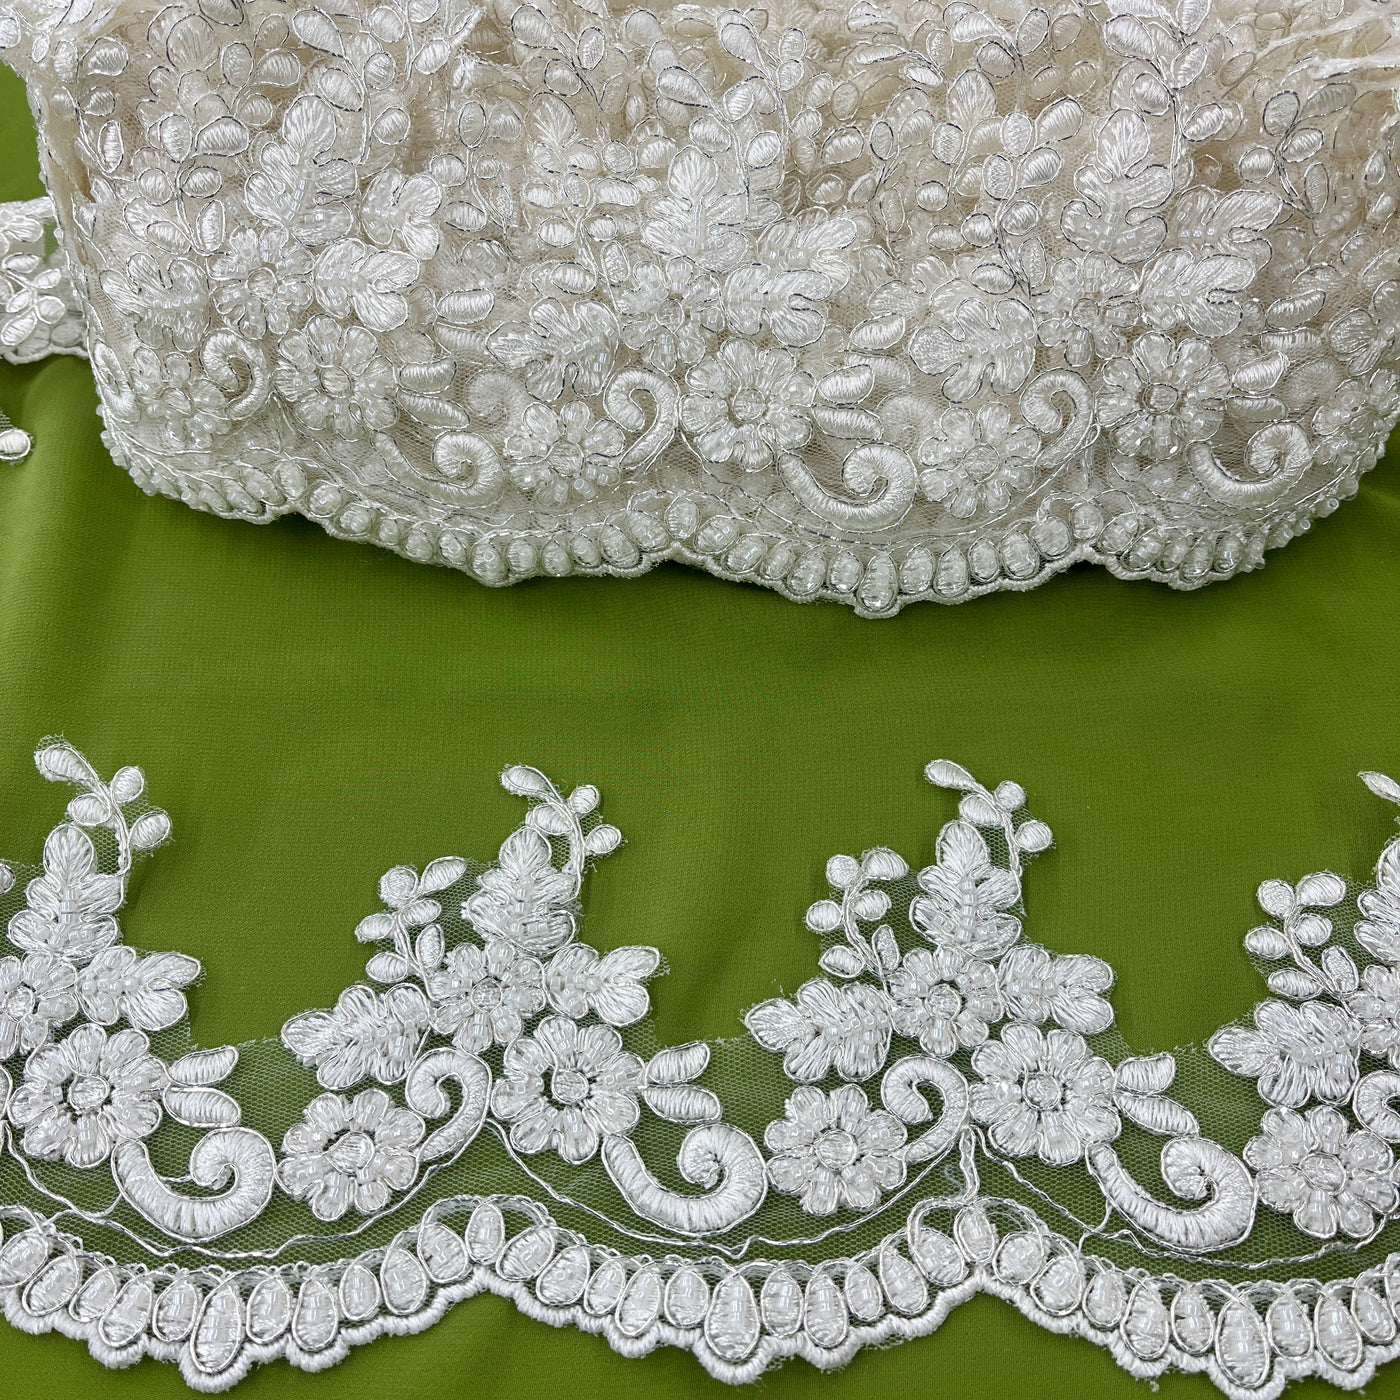 Beaded & Corded Lace Trimming Embroidered on 100% Polyester Net Mesh | Lace USA - 96988W-BP